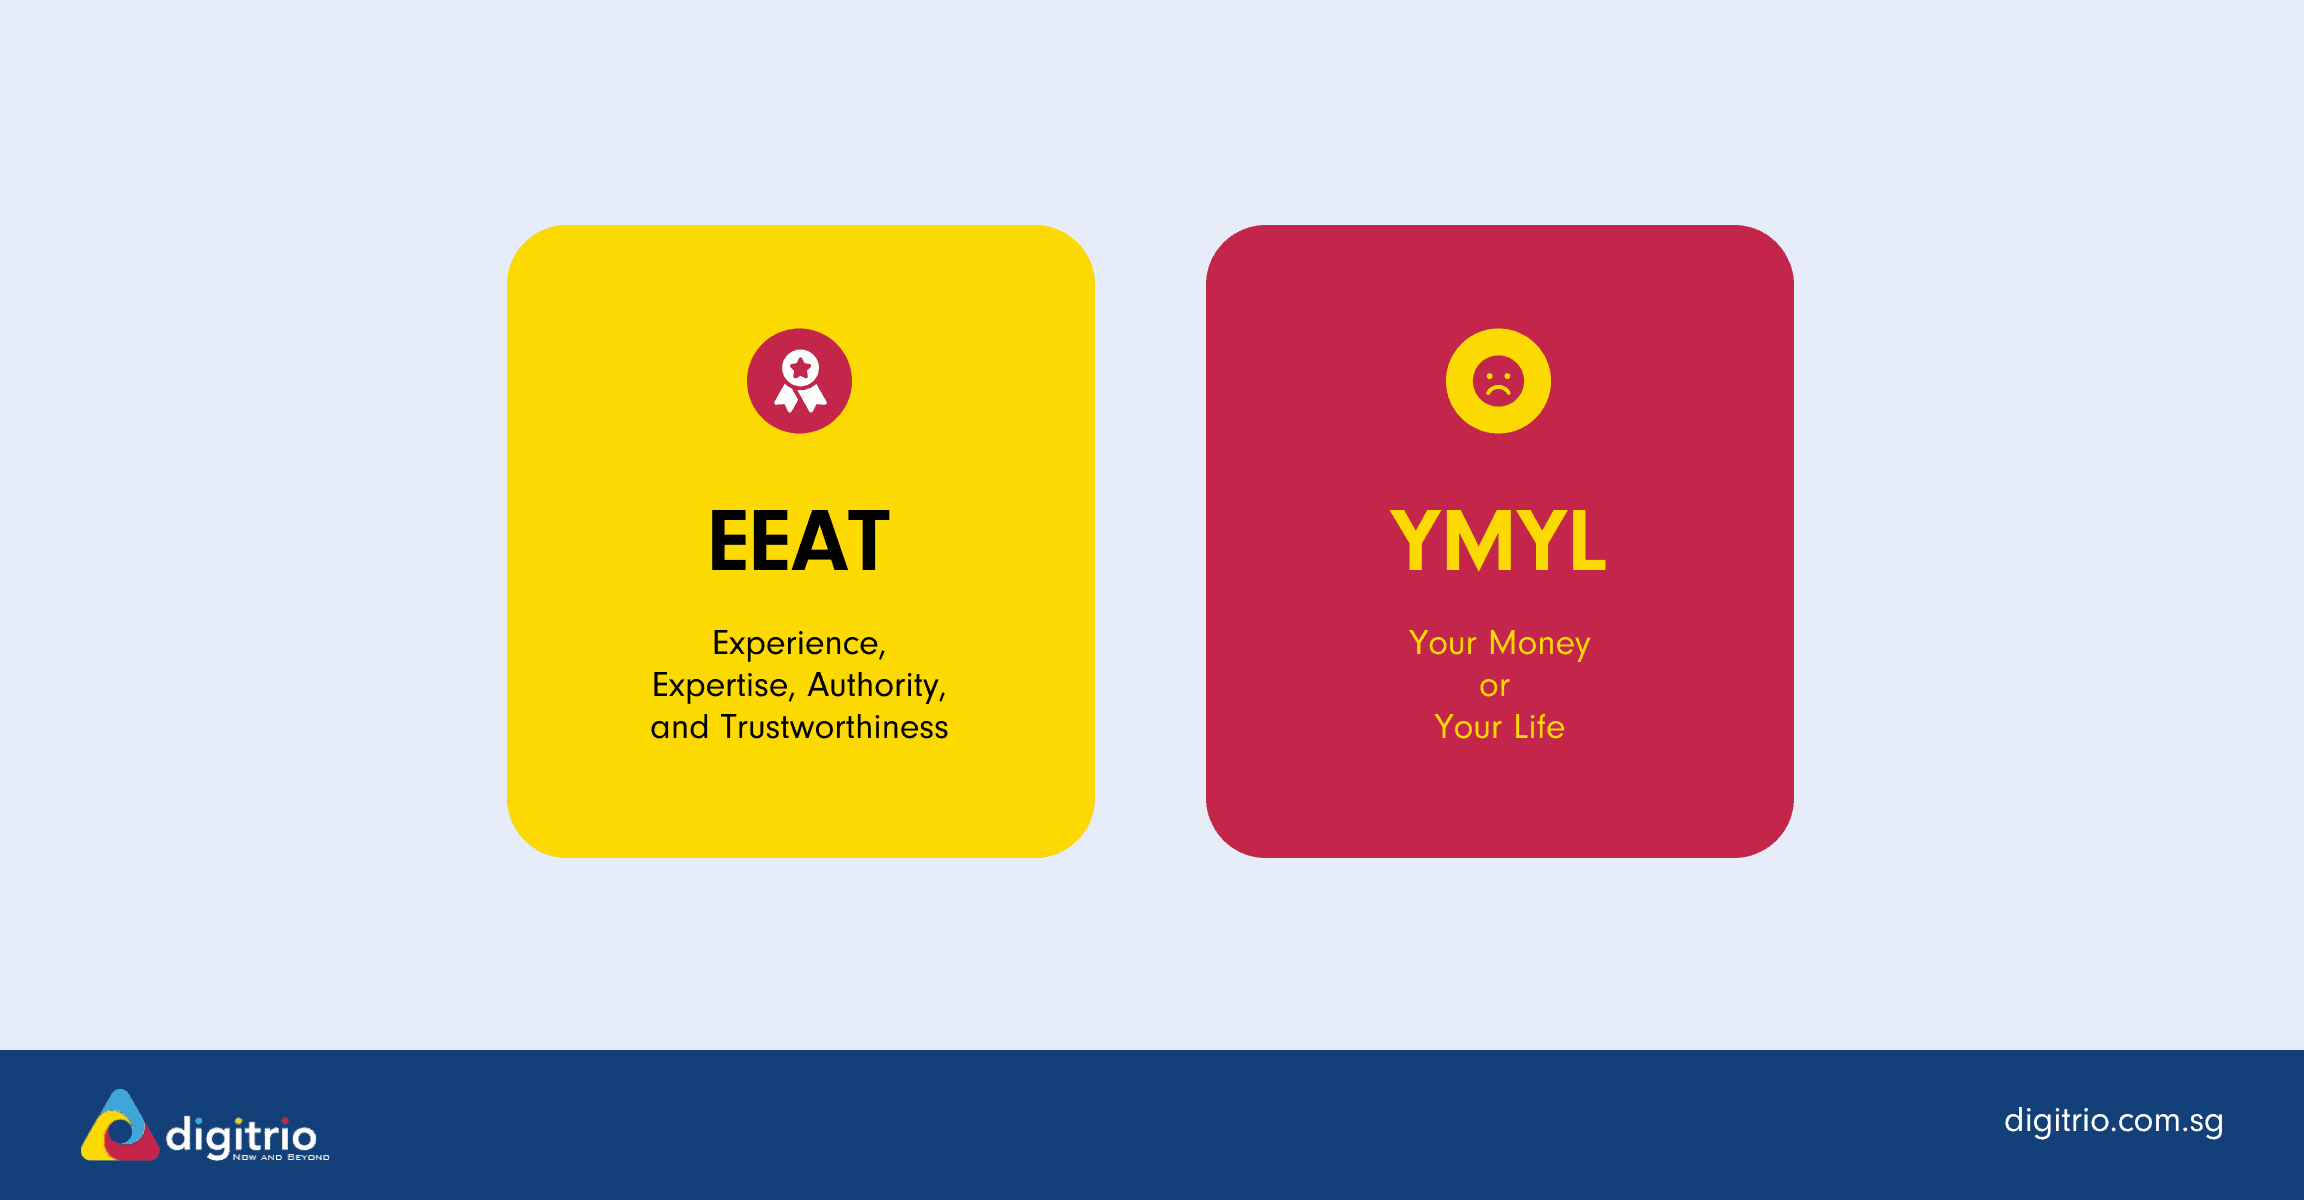 EEAT and YMYL graphic by Digitrio